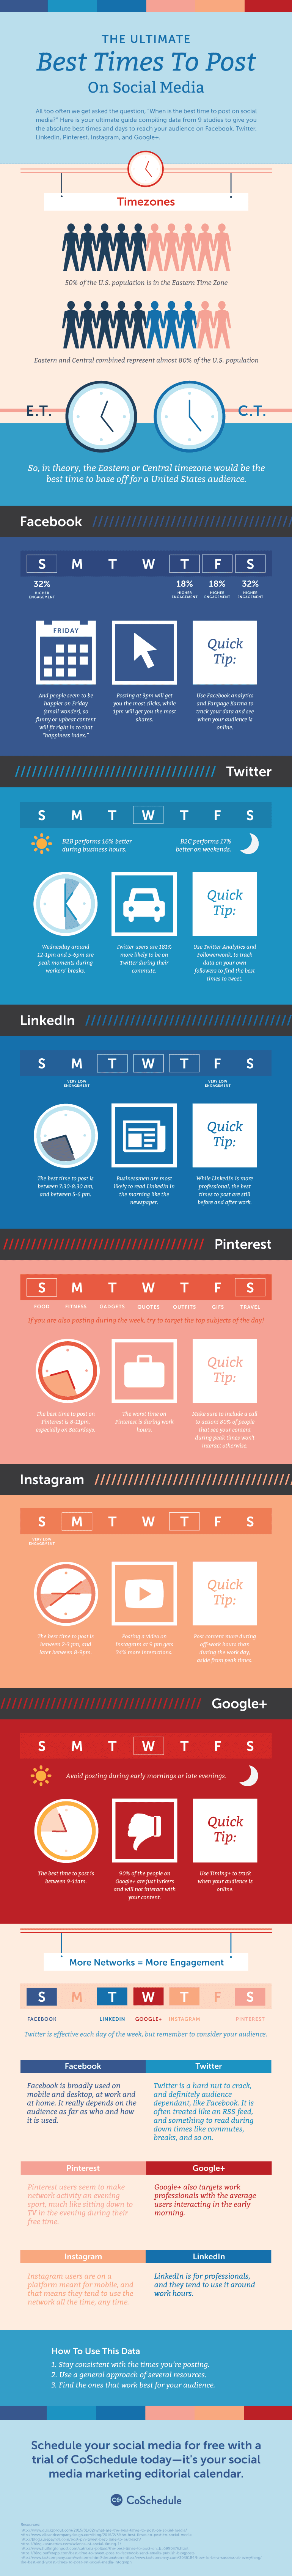 when-is-the-best-time-to-post-on-social-media-infographic